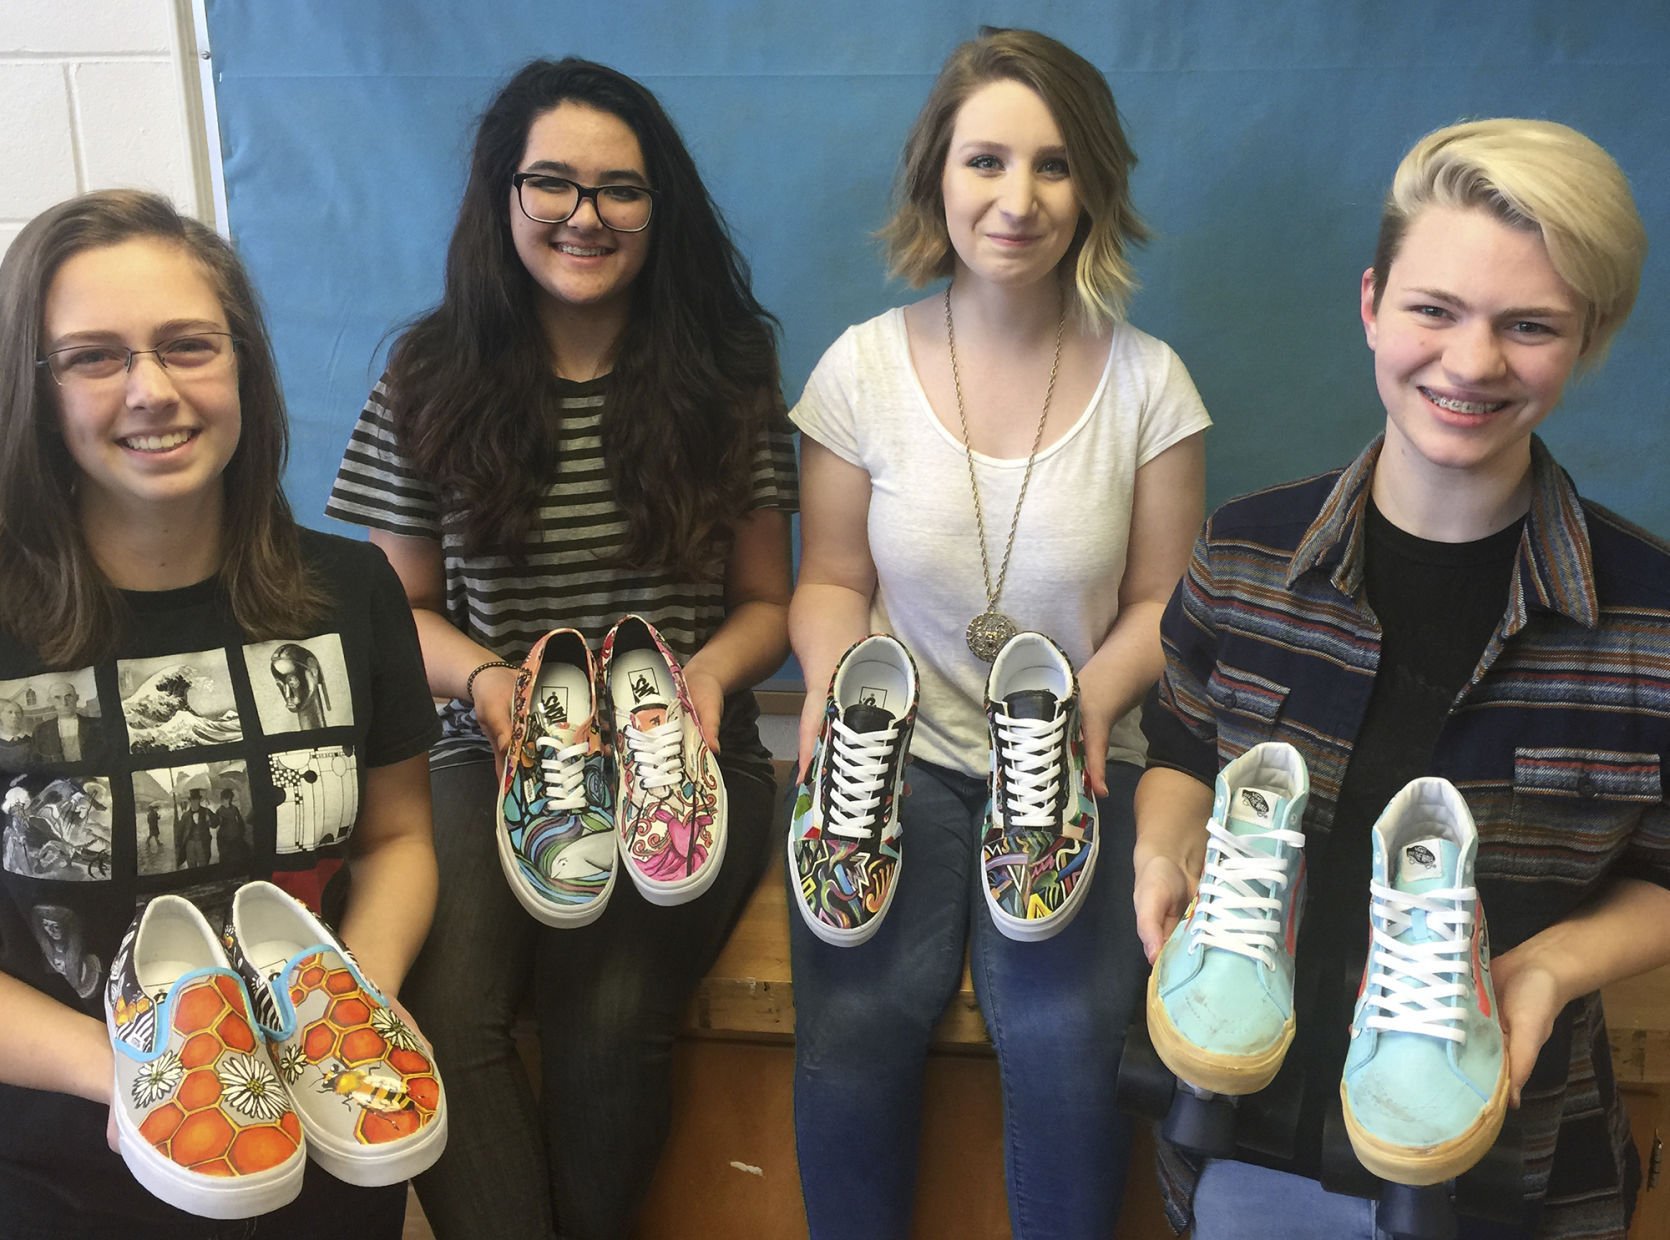 Cool shoes put local students on top in 